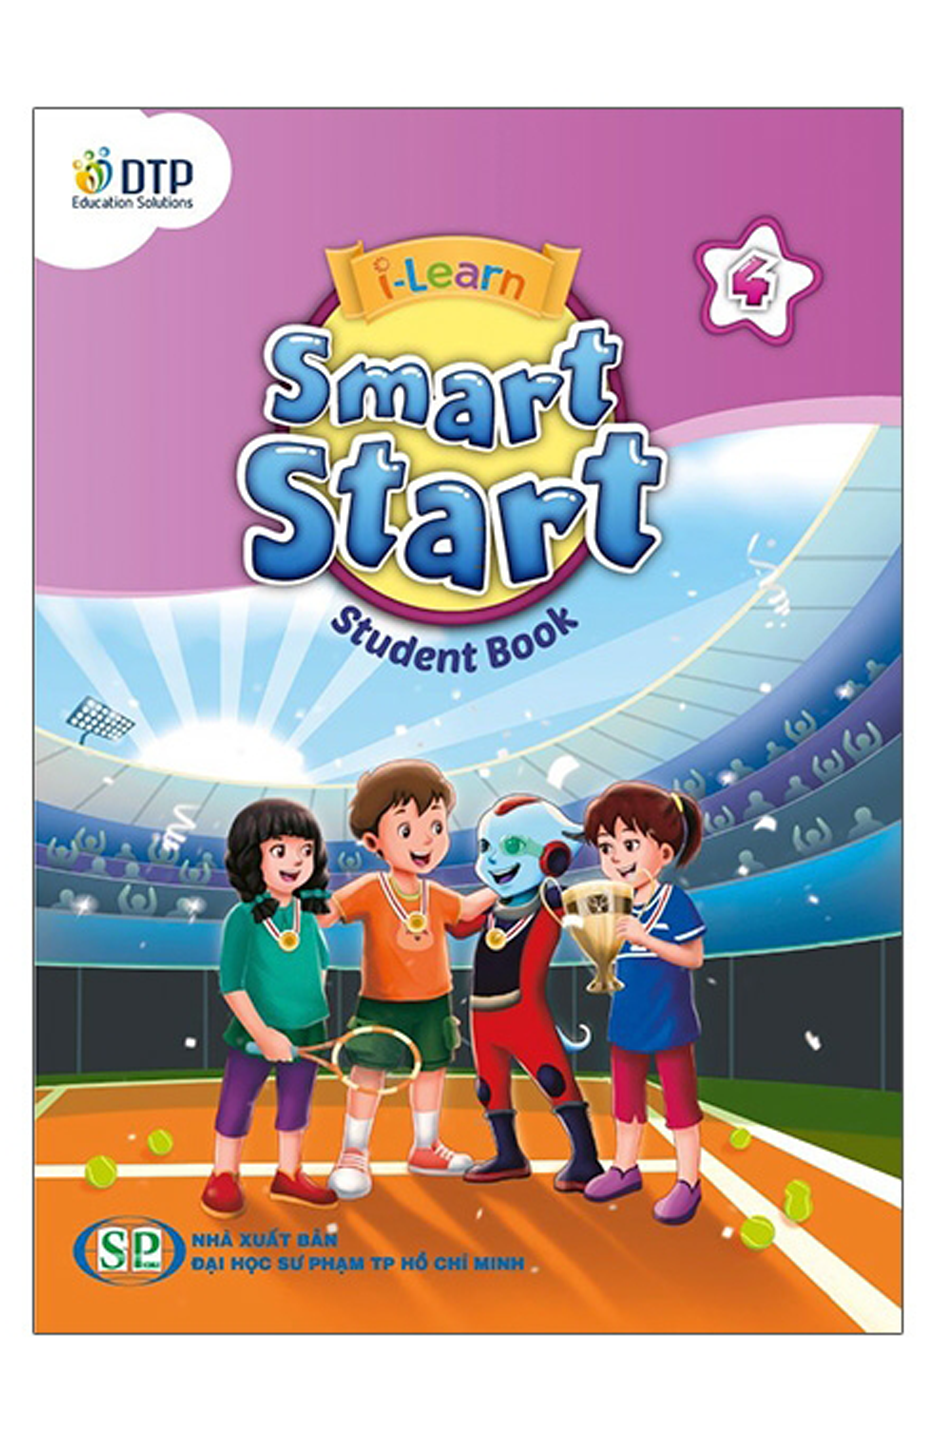 I-Learn Smart Start 4 - Student's Book Special Edition.